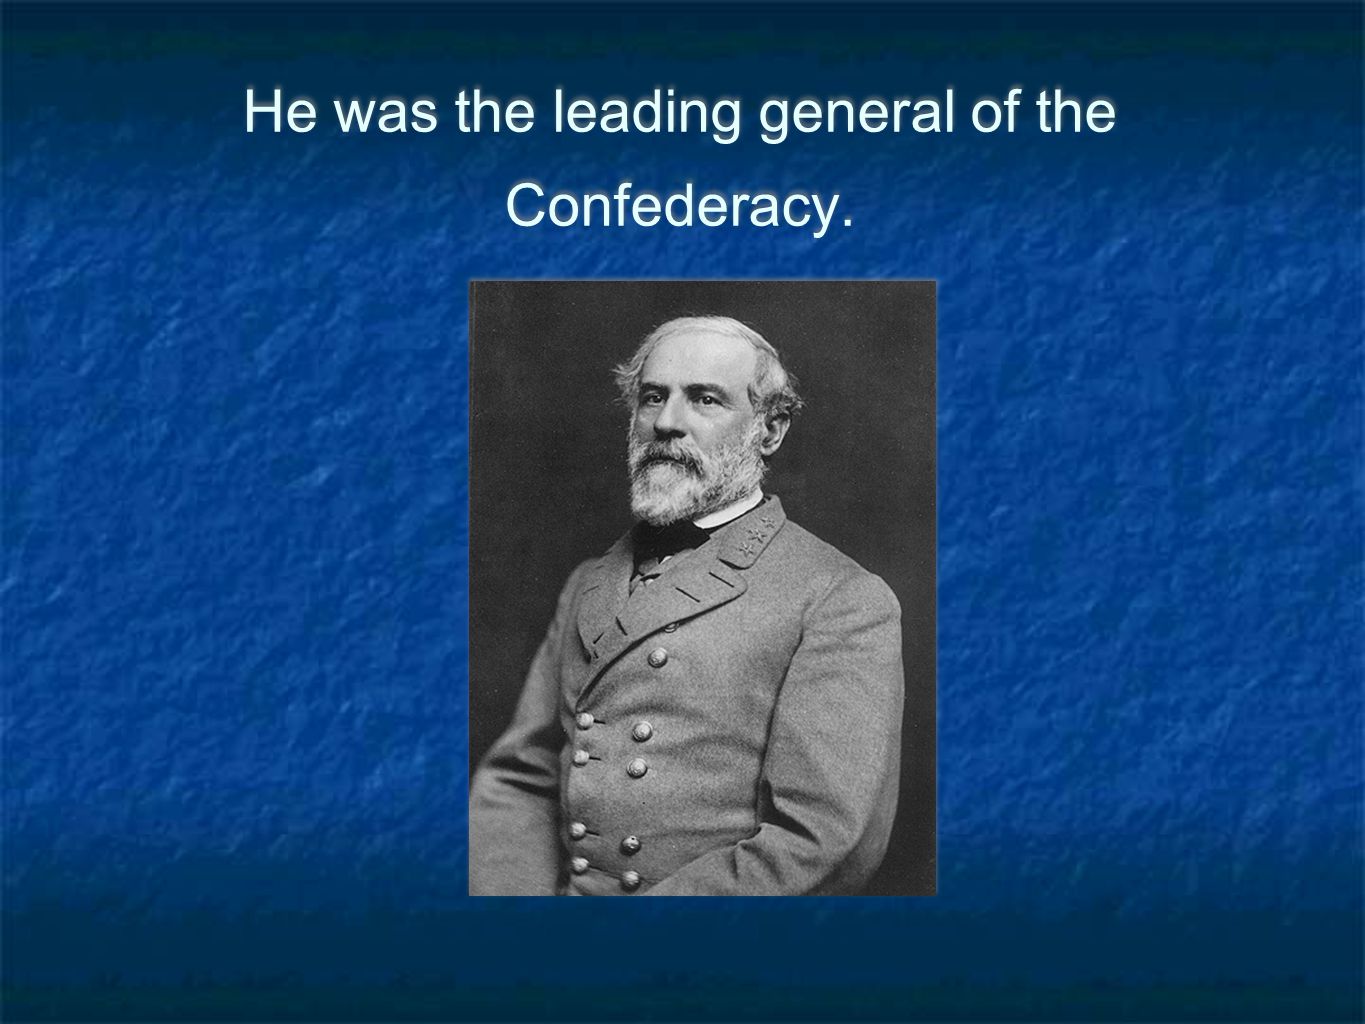 He was the leading general of the Confederacy.